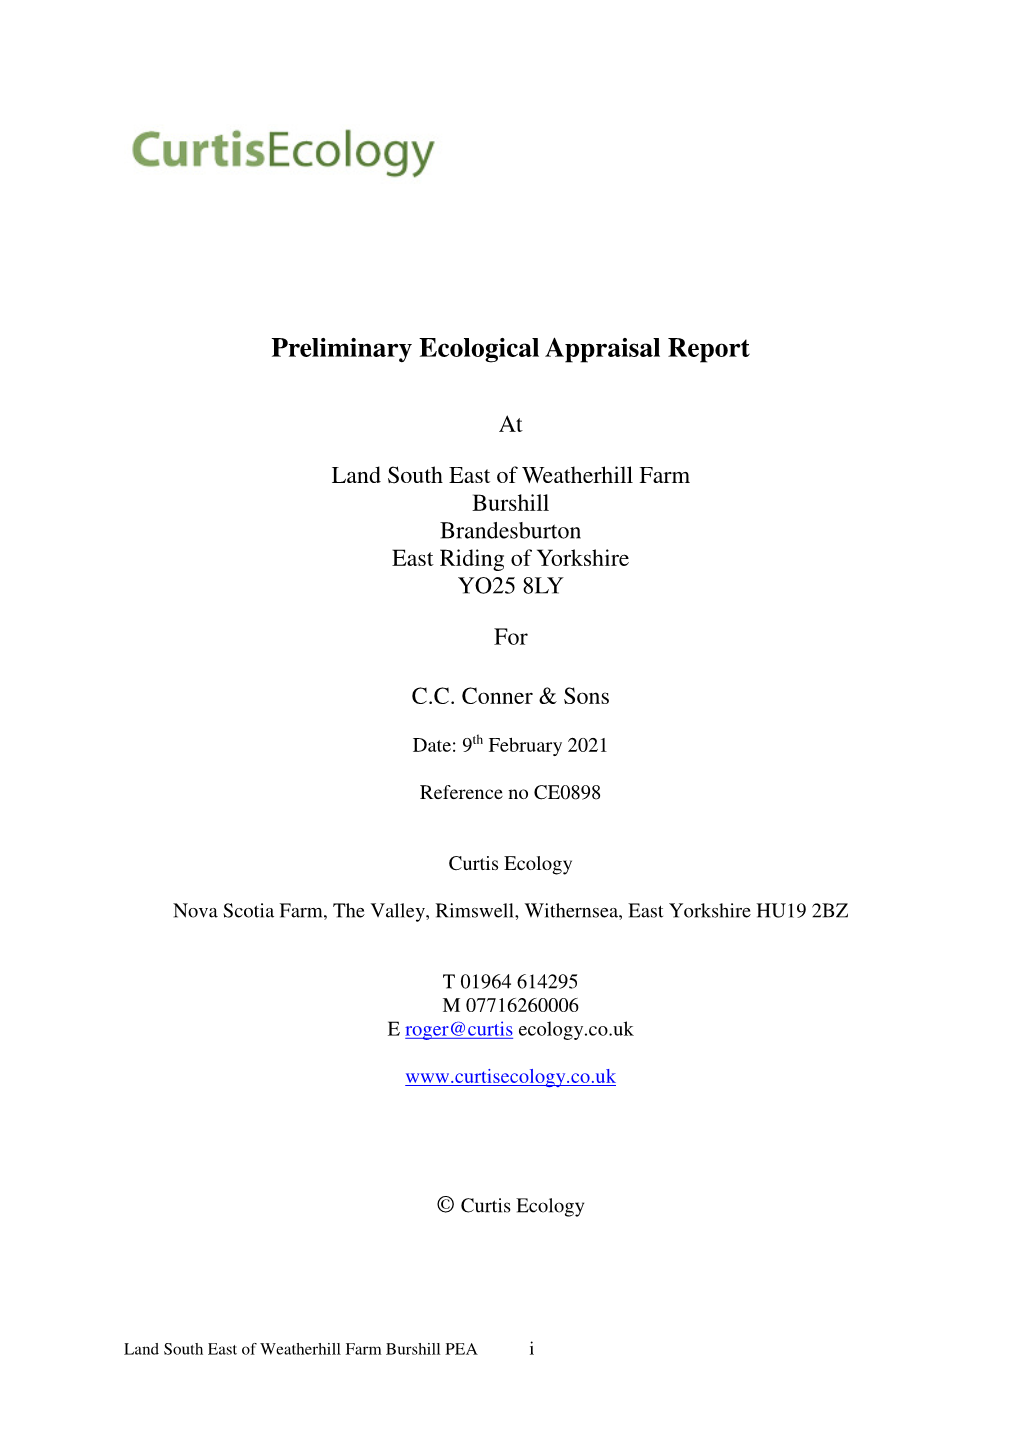 Preliminary Ecological Appraisal Report